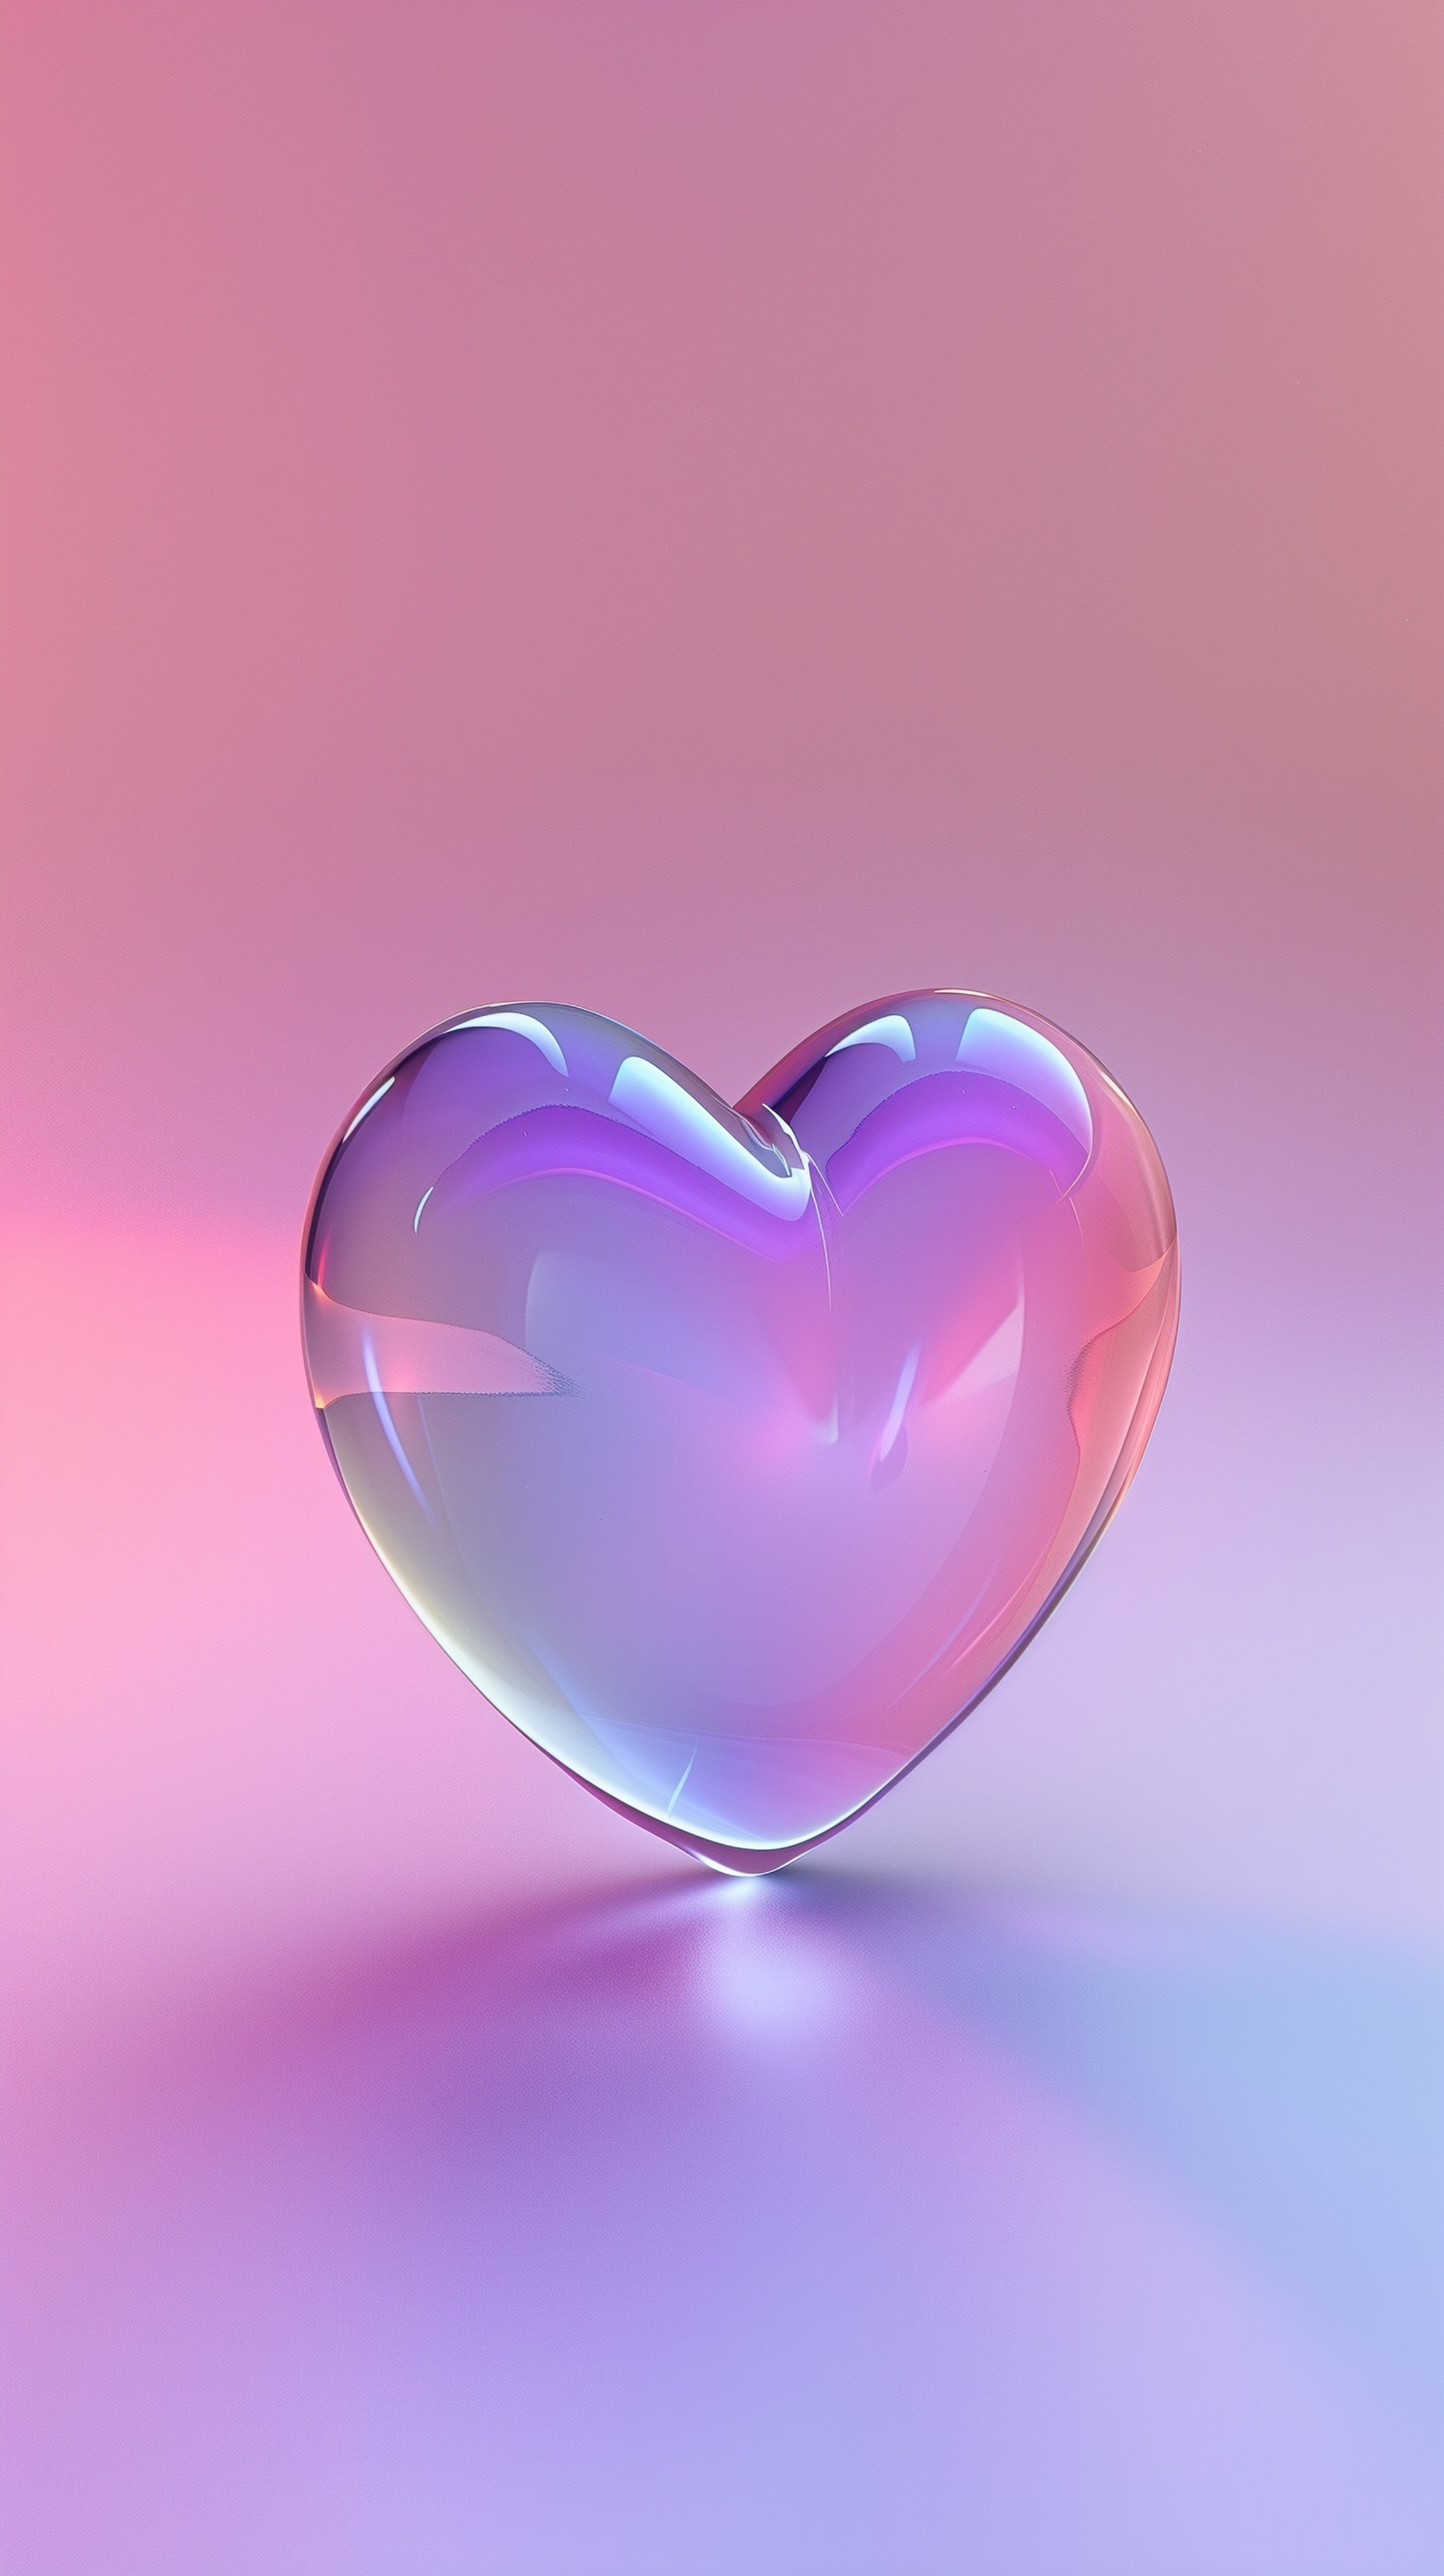 Colorful Glass Heart on Pink Background Обои[47d8940110524ca1b371]